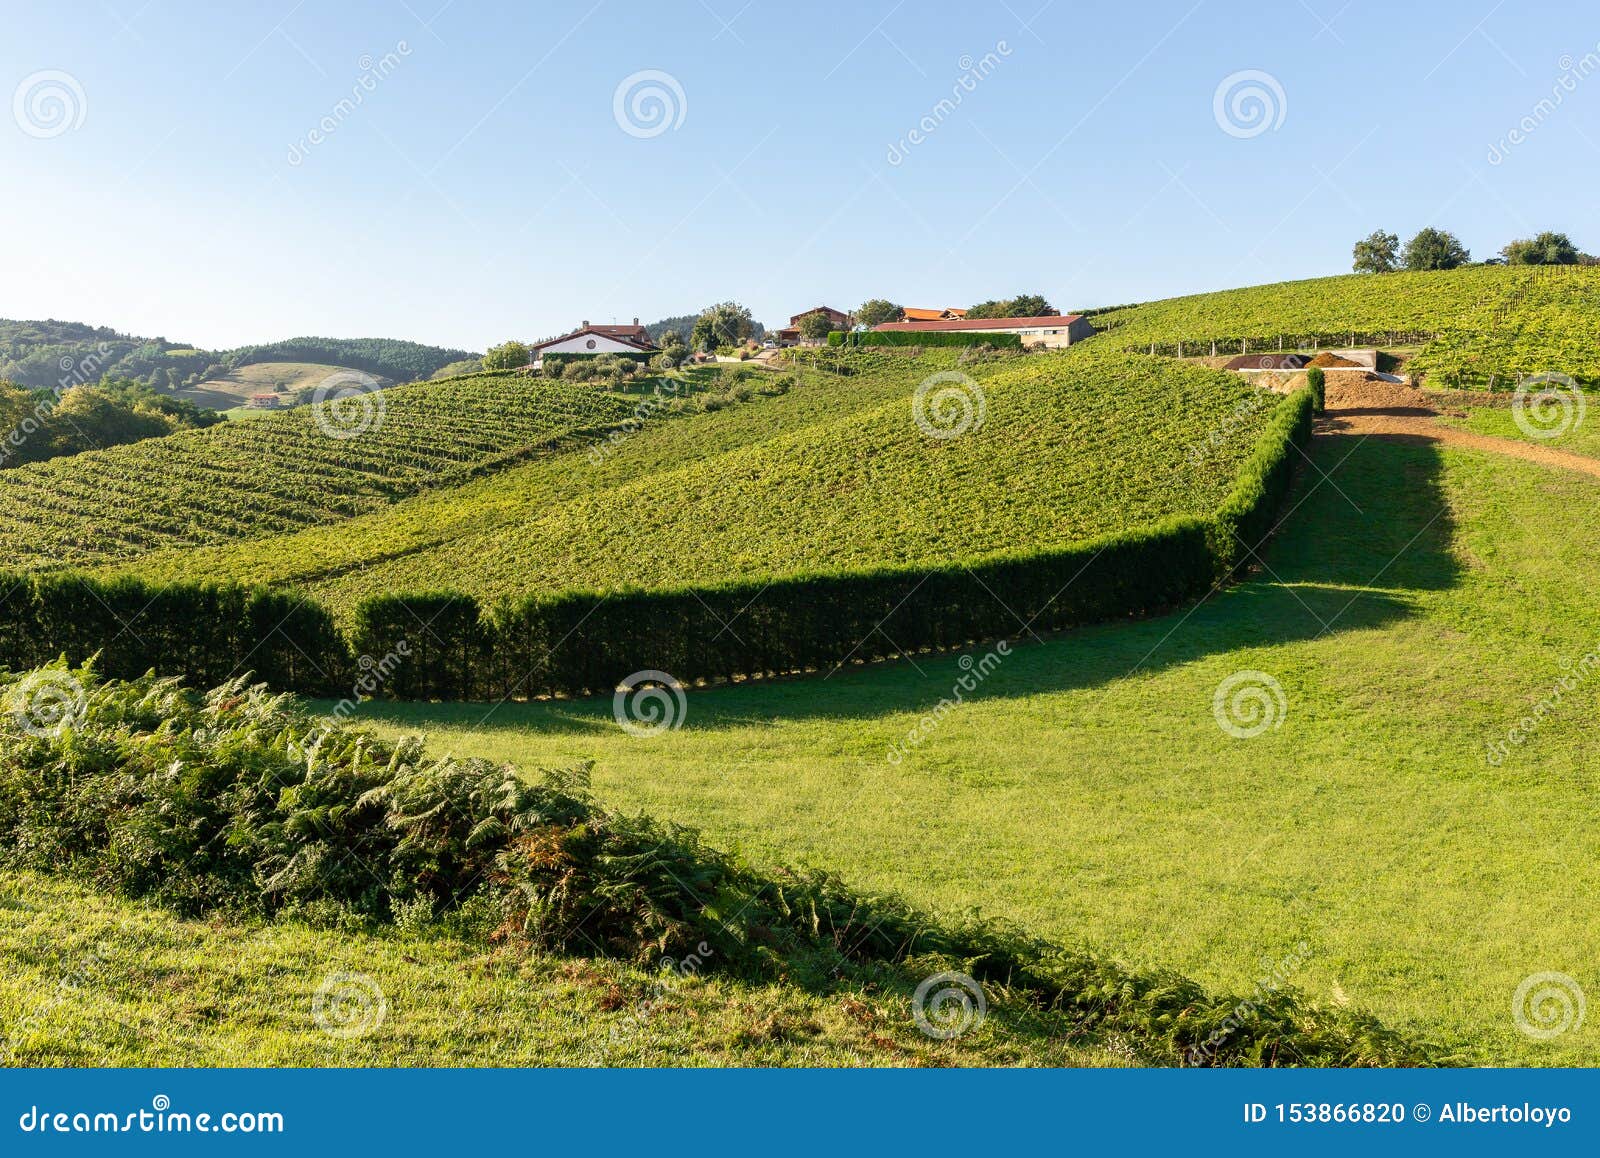 vineyards with the cantabrian sea in the background, getaria, spain